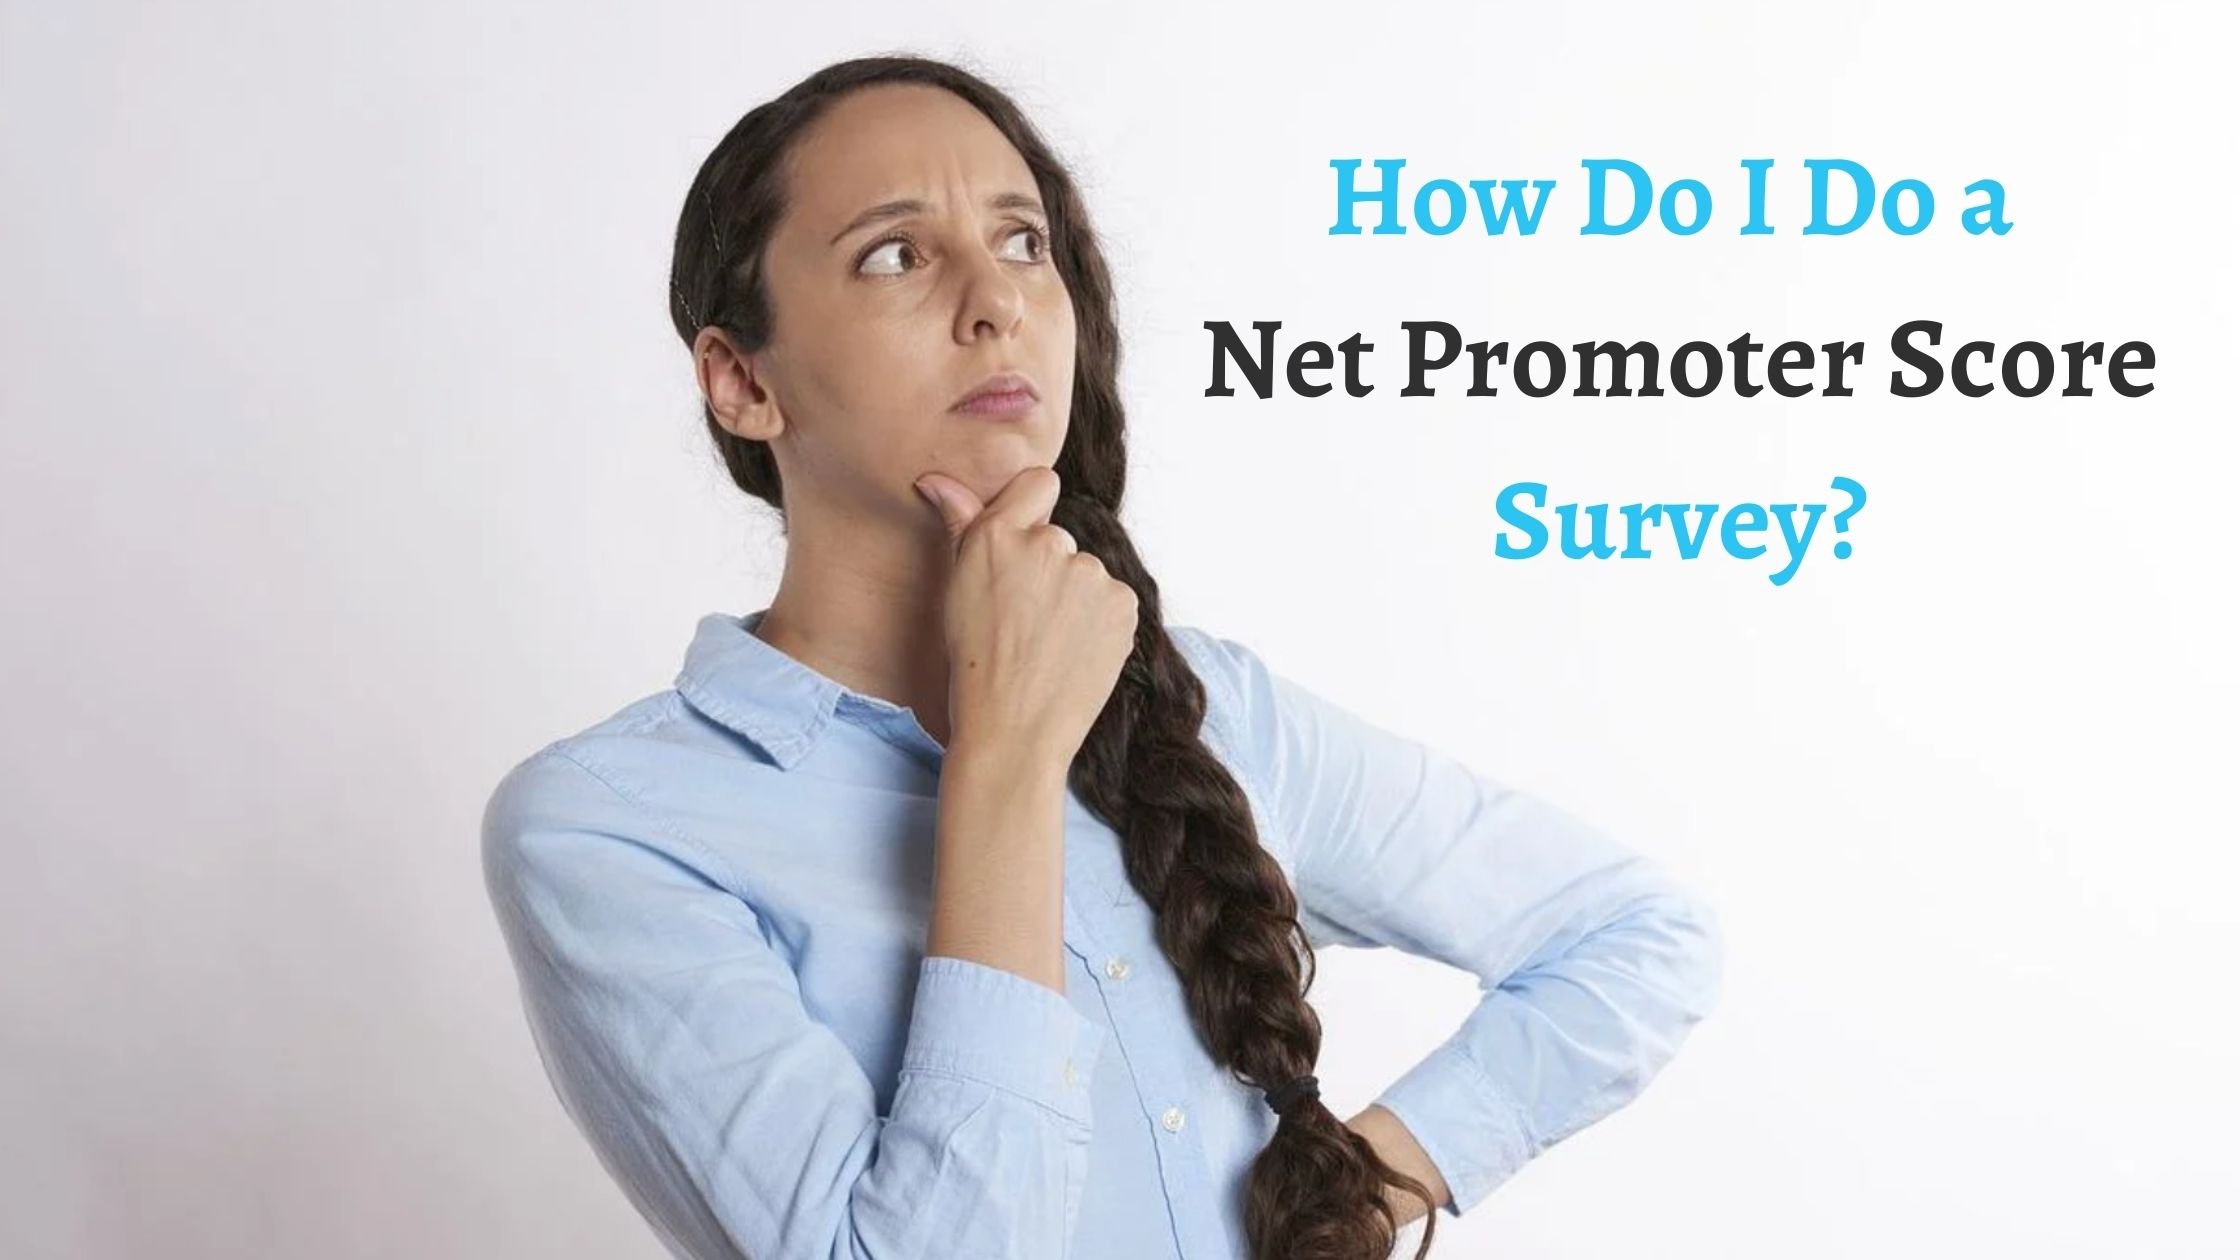 Step-by-step Guide to Measuring Net Promoter Score®